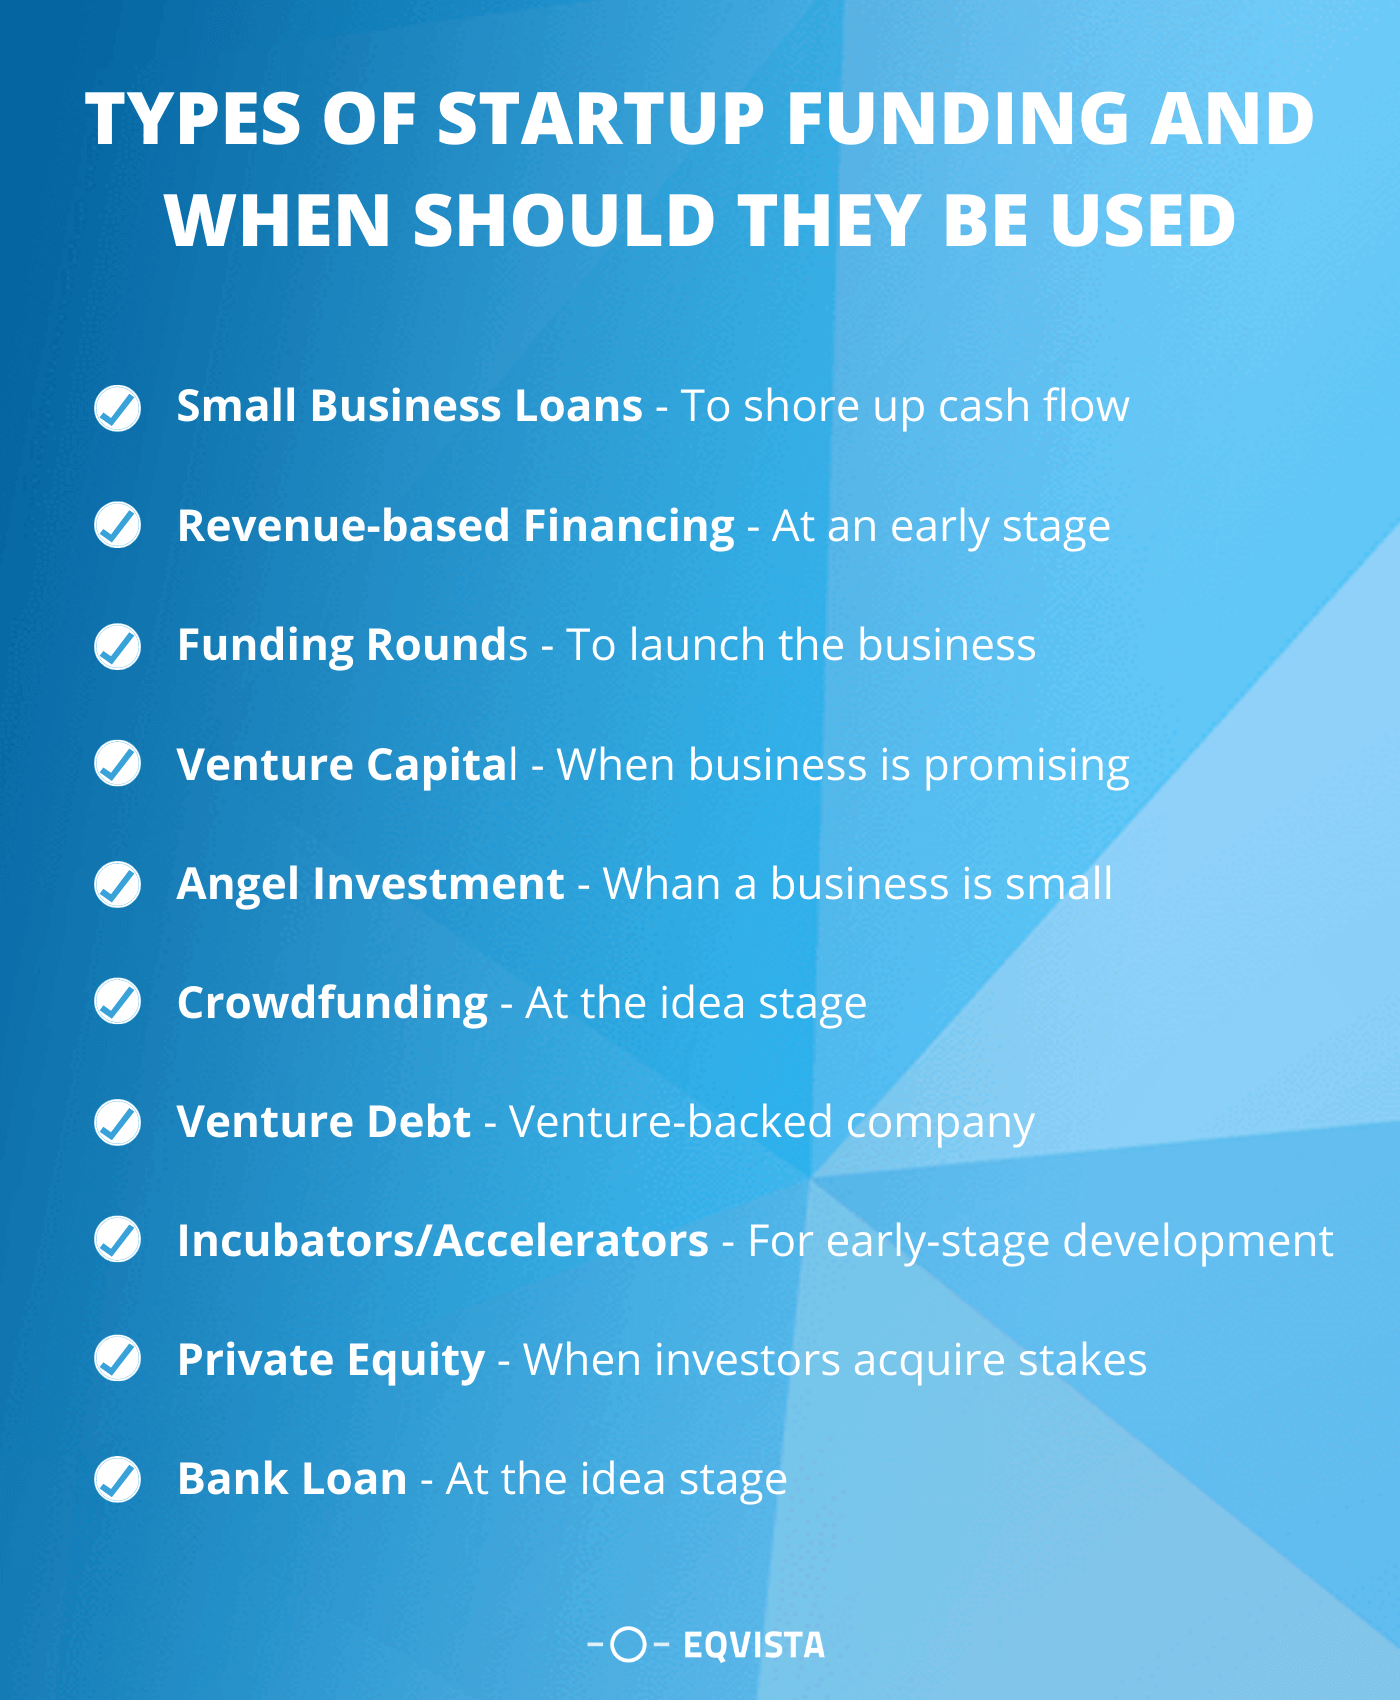 Types of Startup Funding and When Should They Be Used